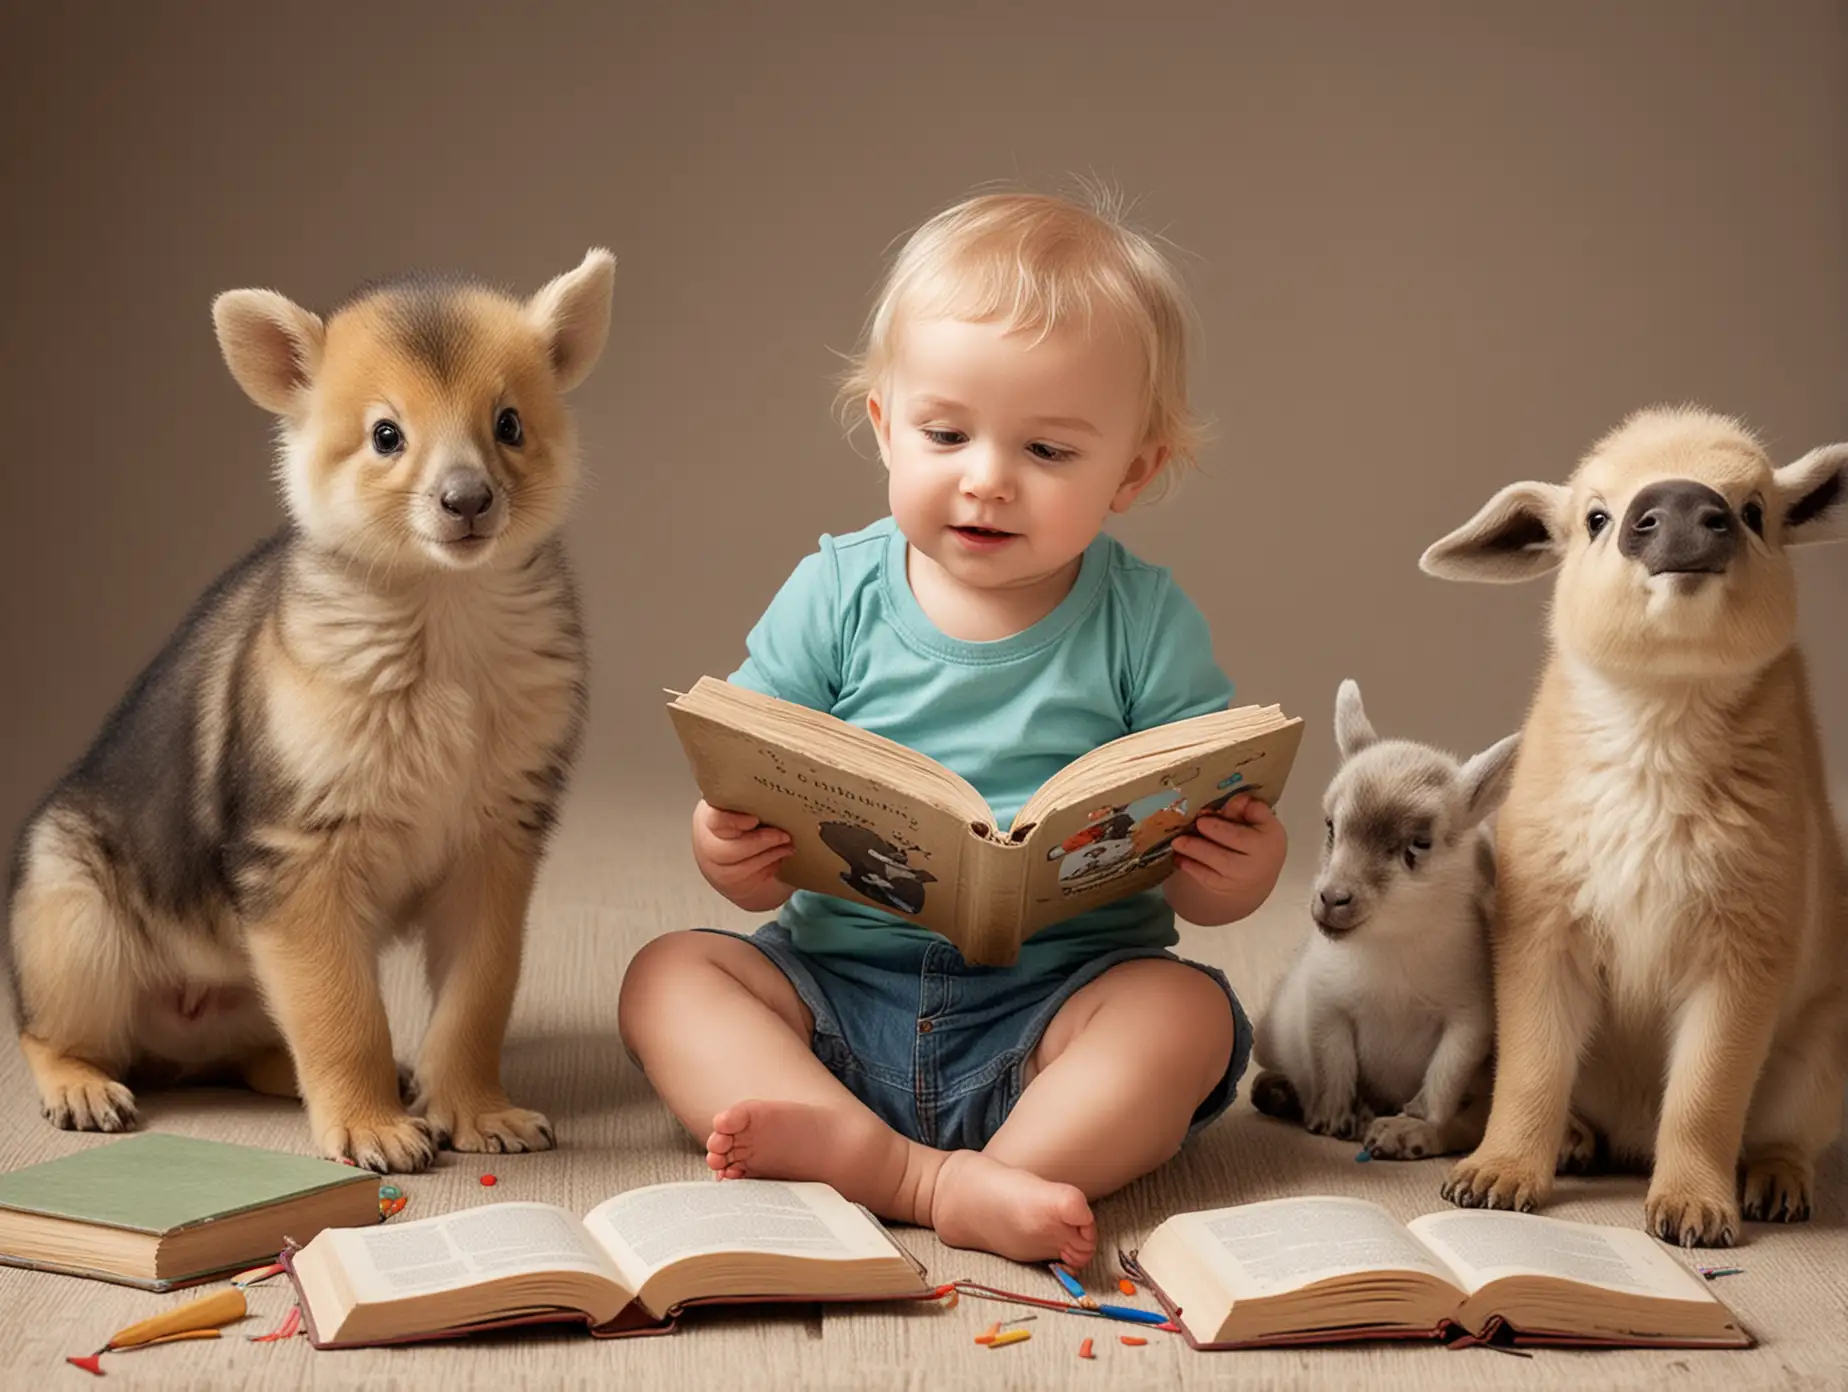 Baby Animals and Toddlers Enjoying Playtime with Books